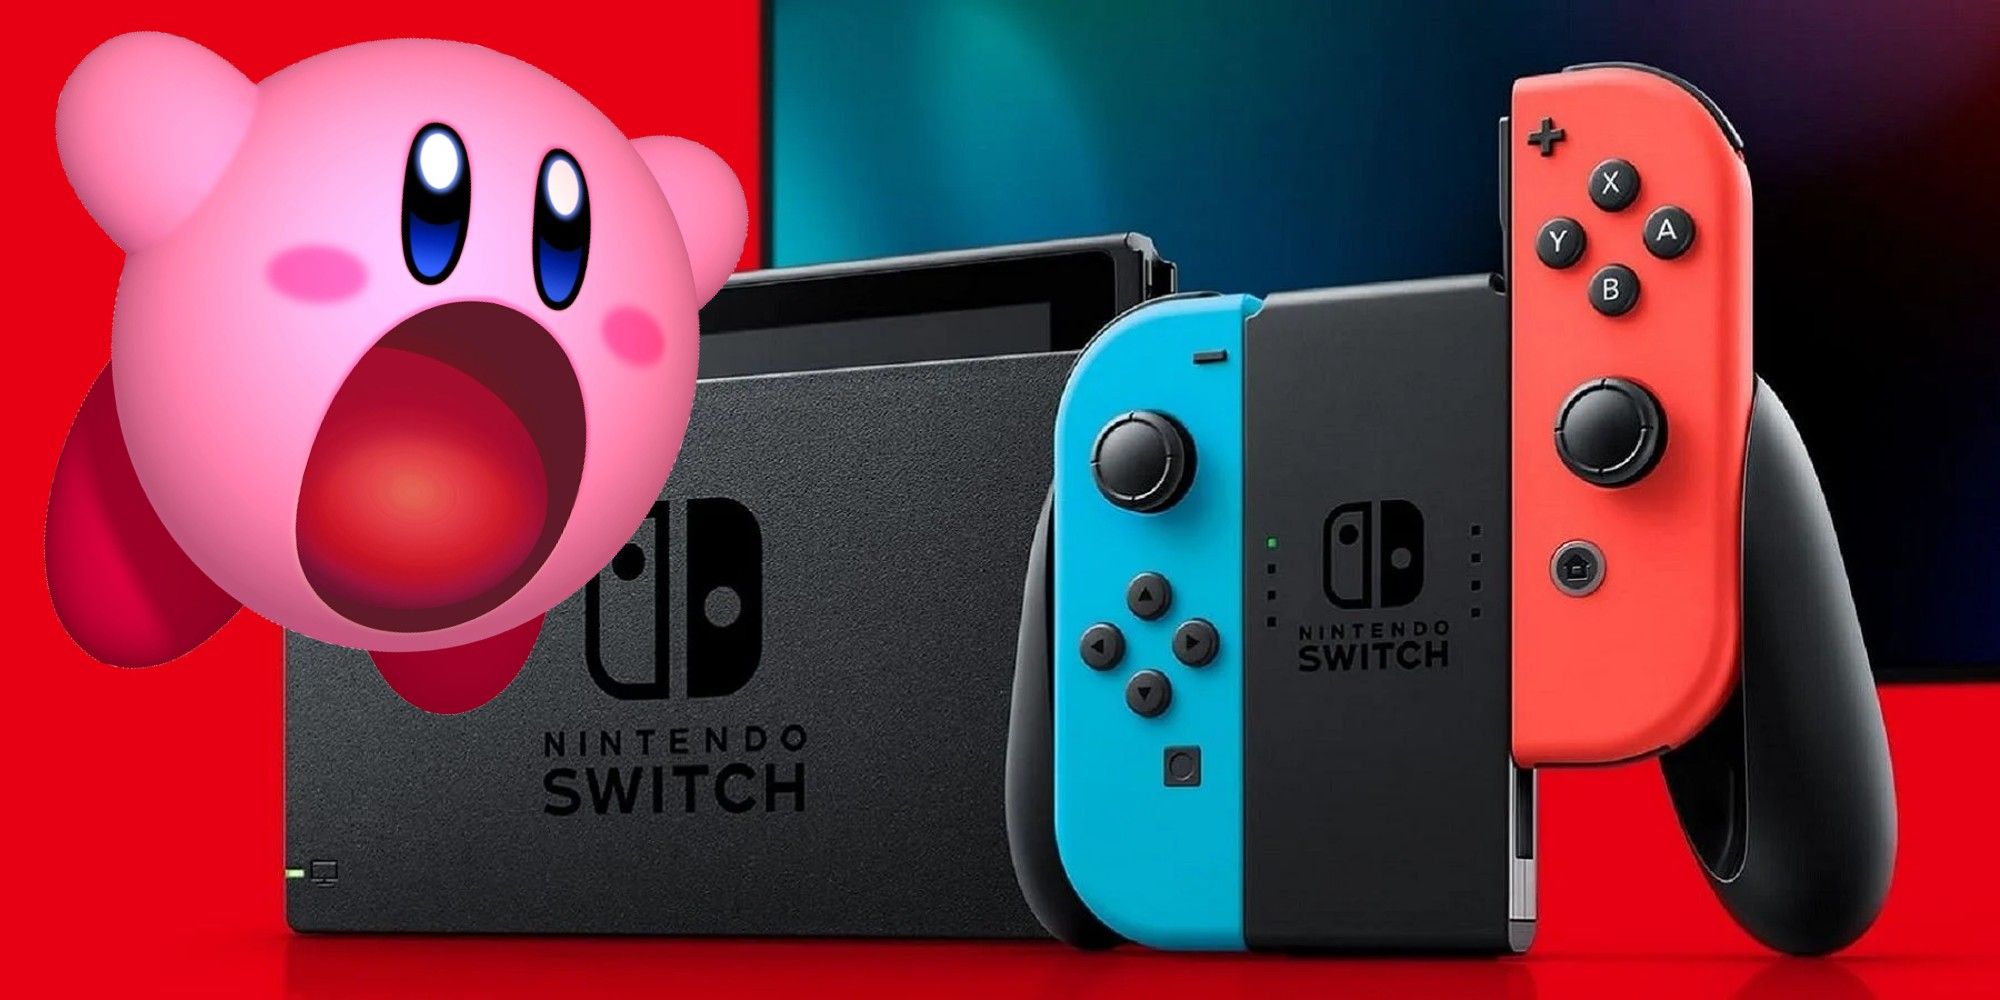 Kirby Has Come To Life To Eat Your Nintendo Switch With New OLED Packaging